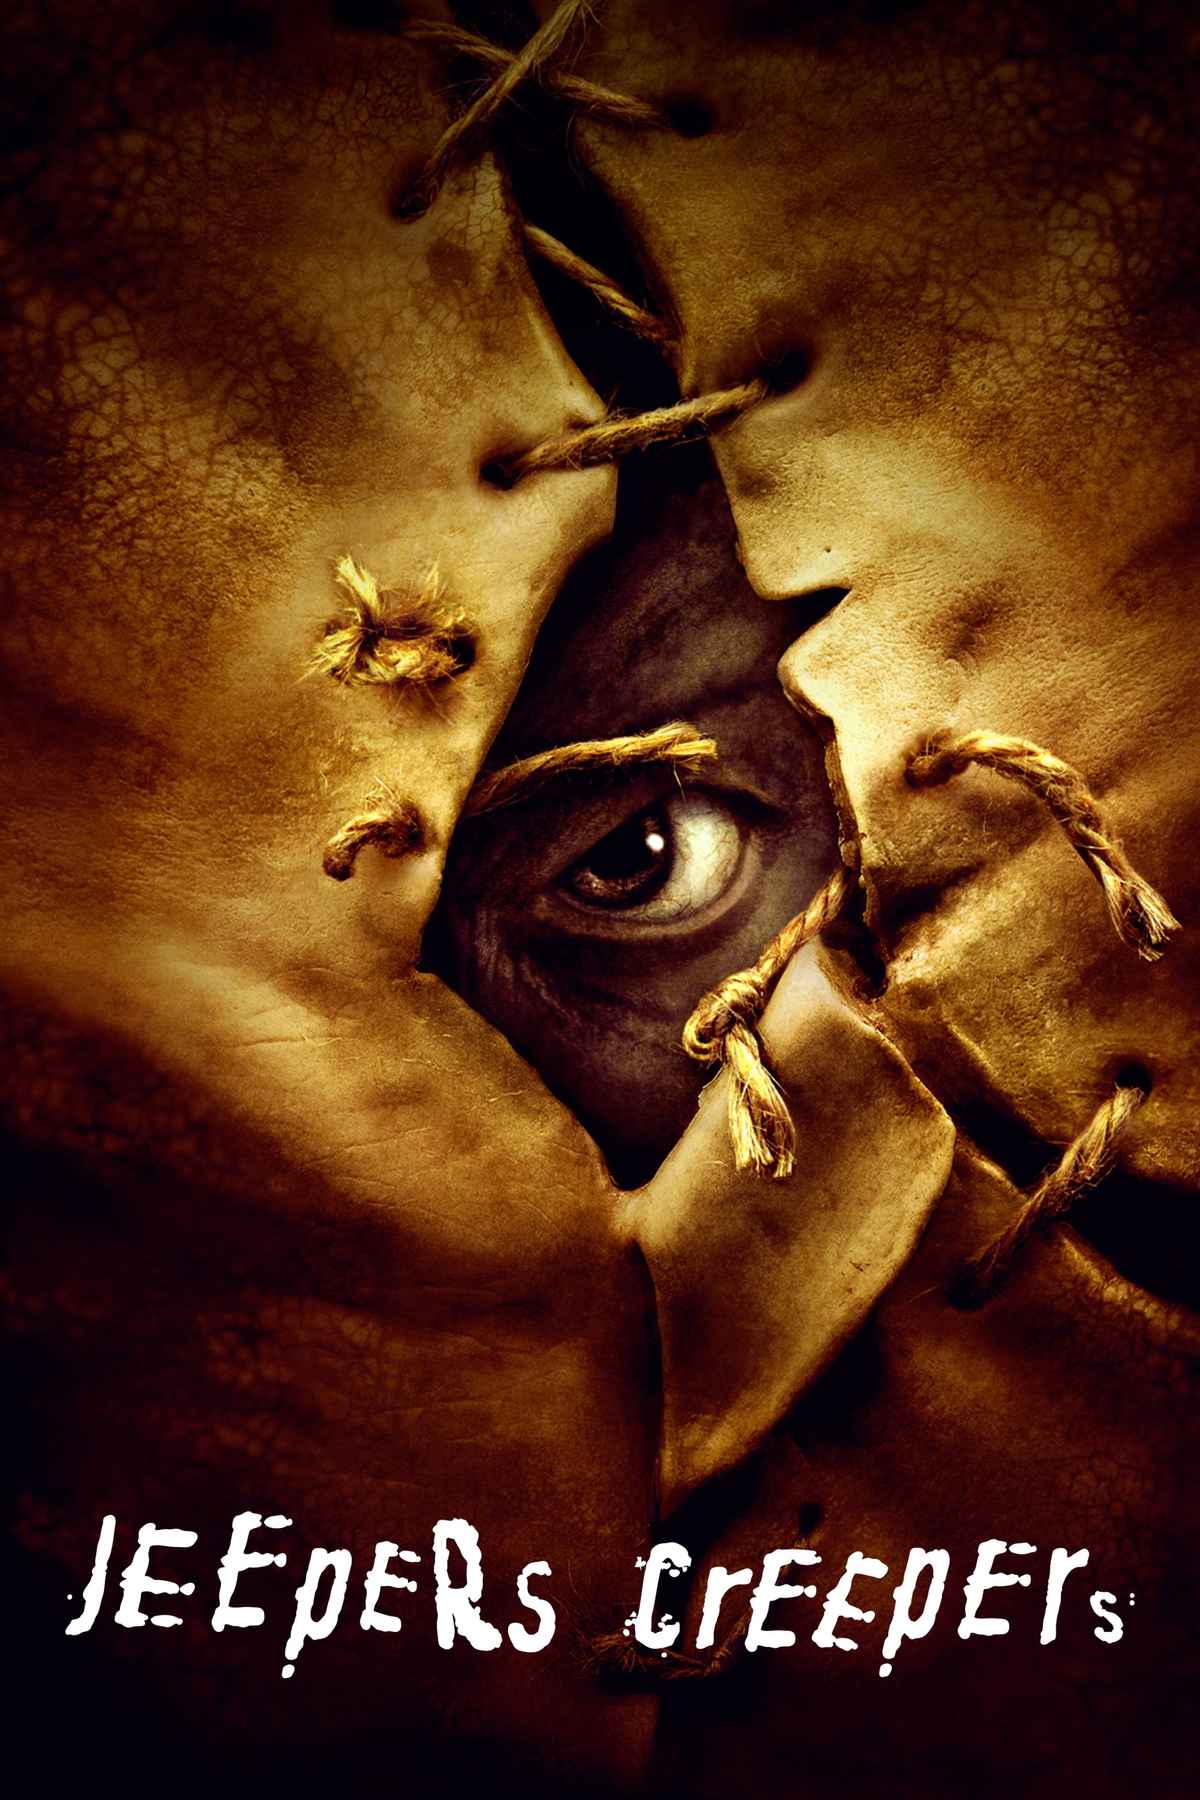 jeepers creepers free full movie online